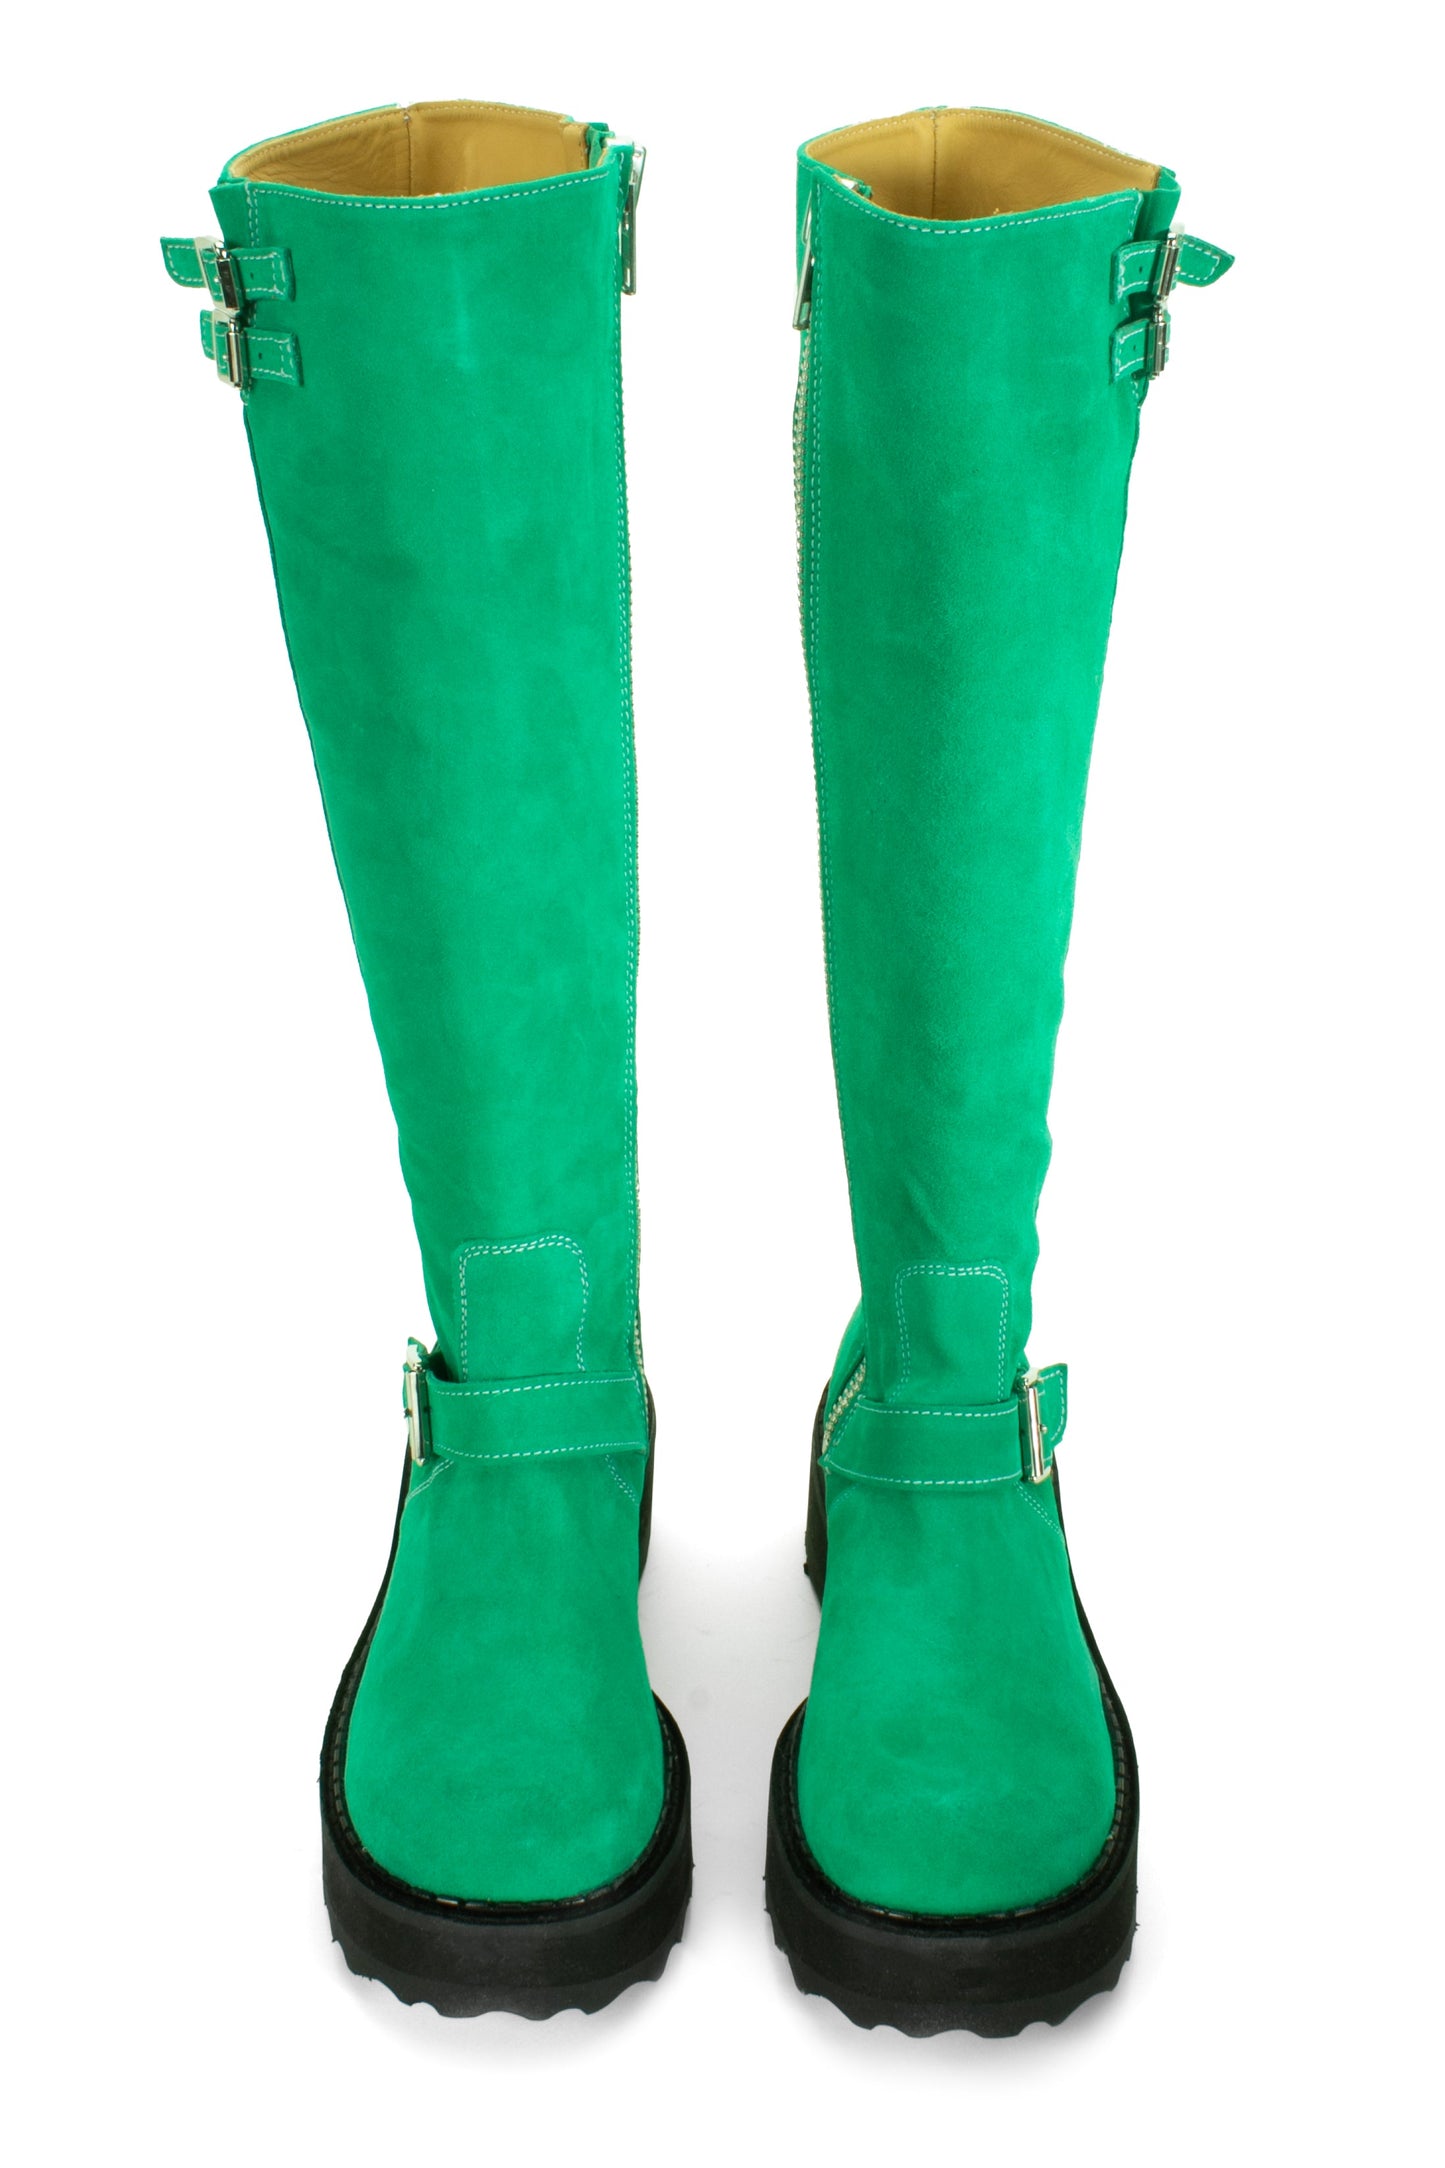 Boots in Green are an under-the-knee-high, silver buckles with green stiches